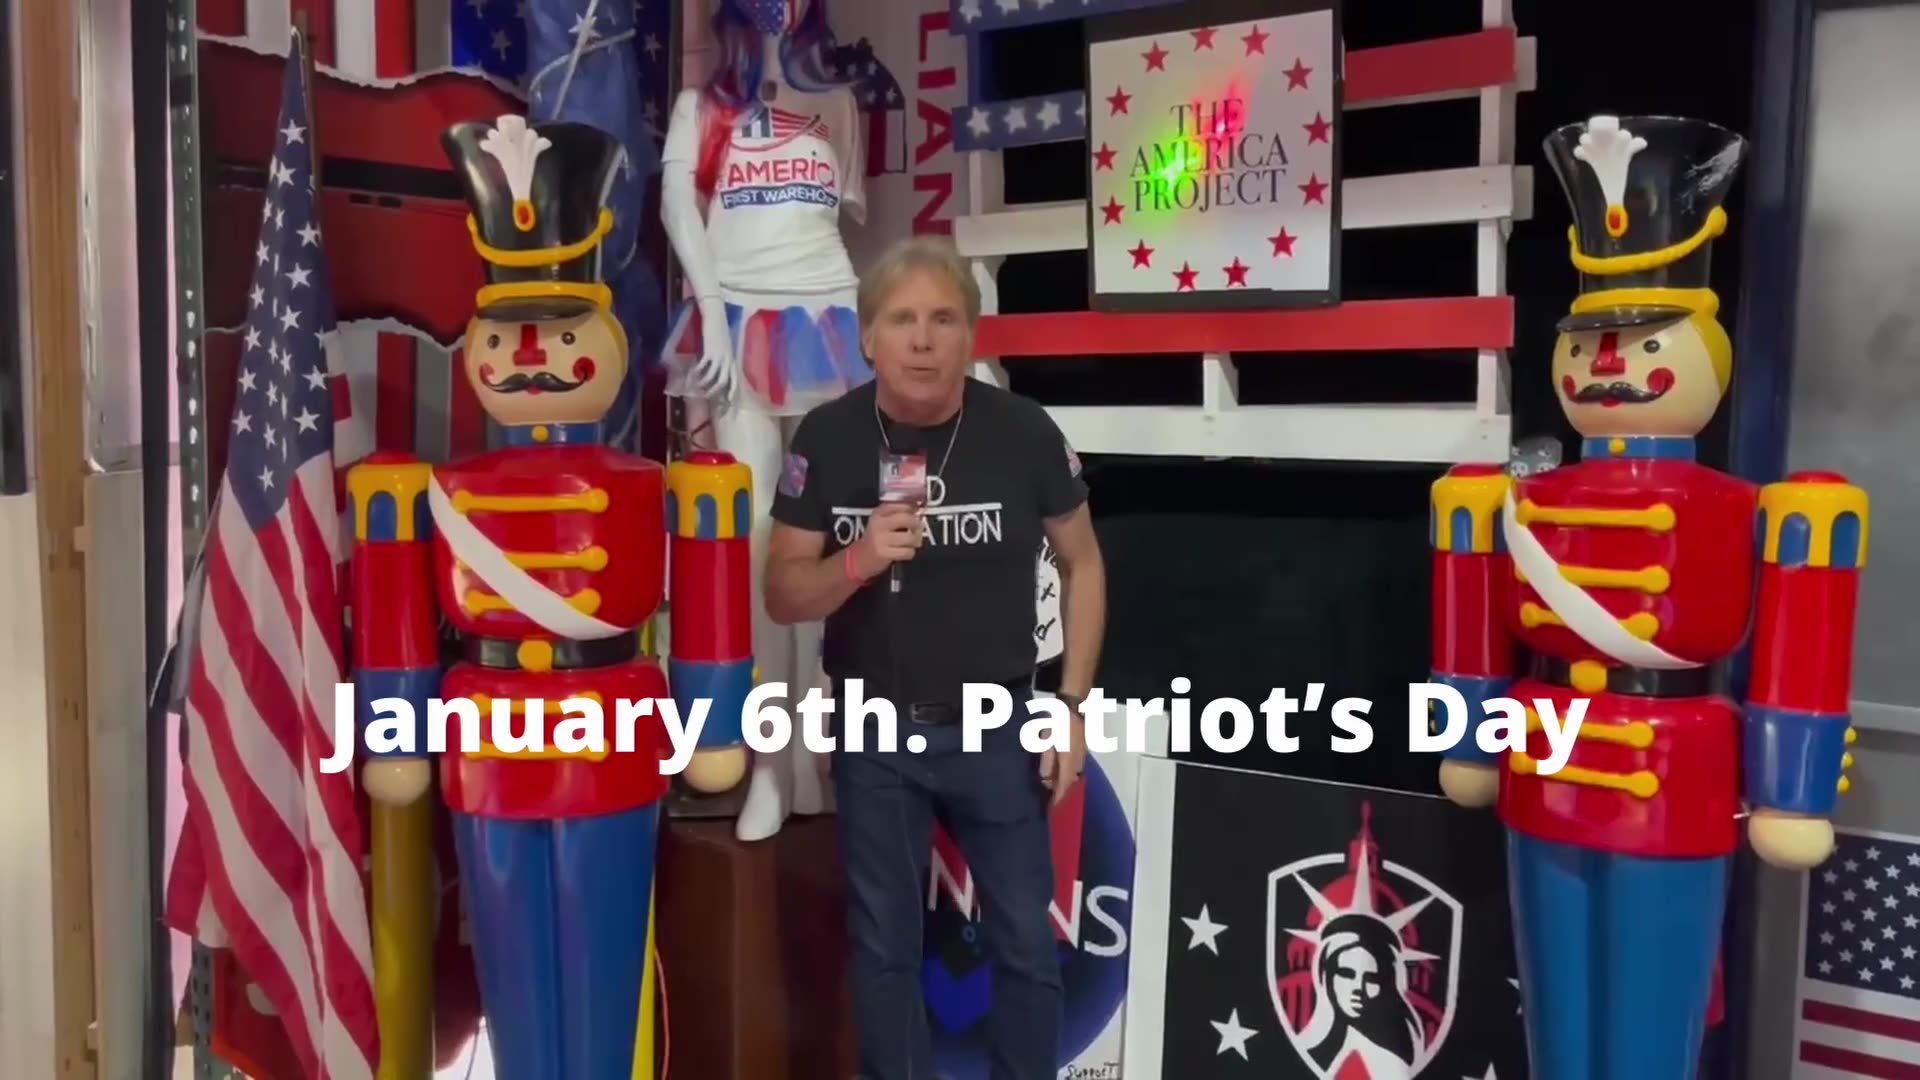 Joe"The Box" Blows up The January 6th Patriots Day Event